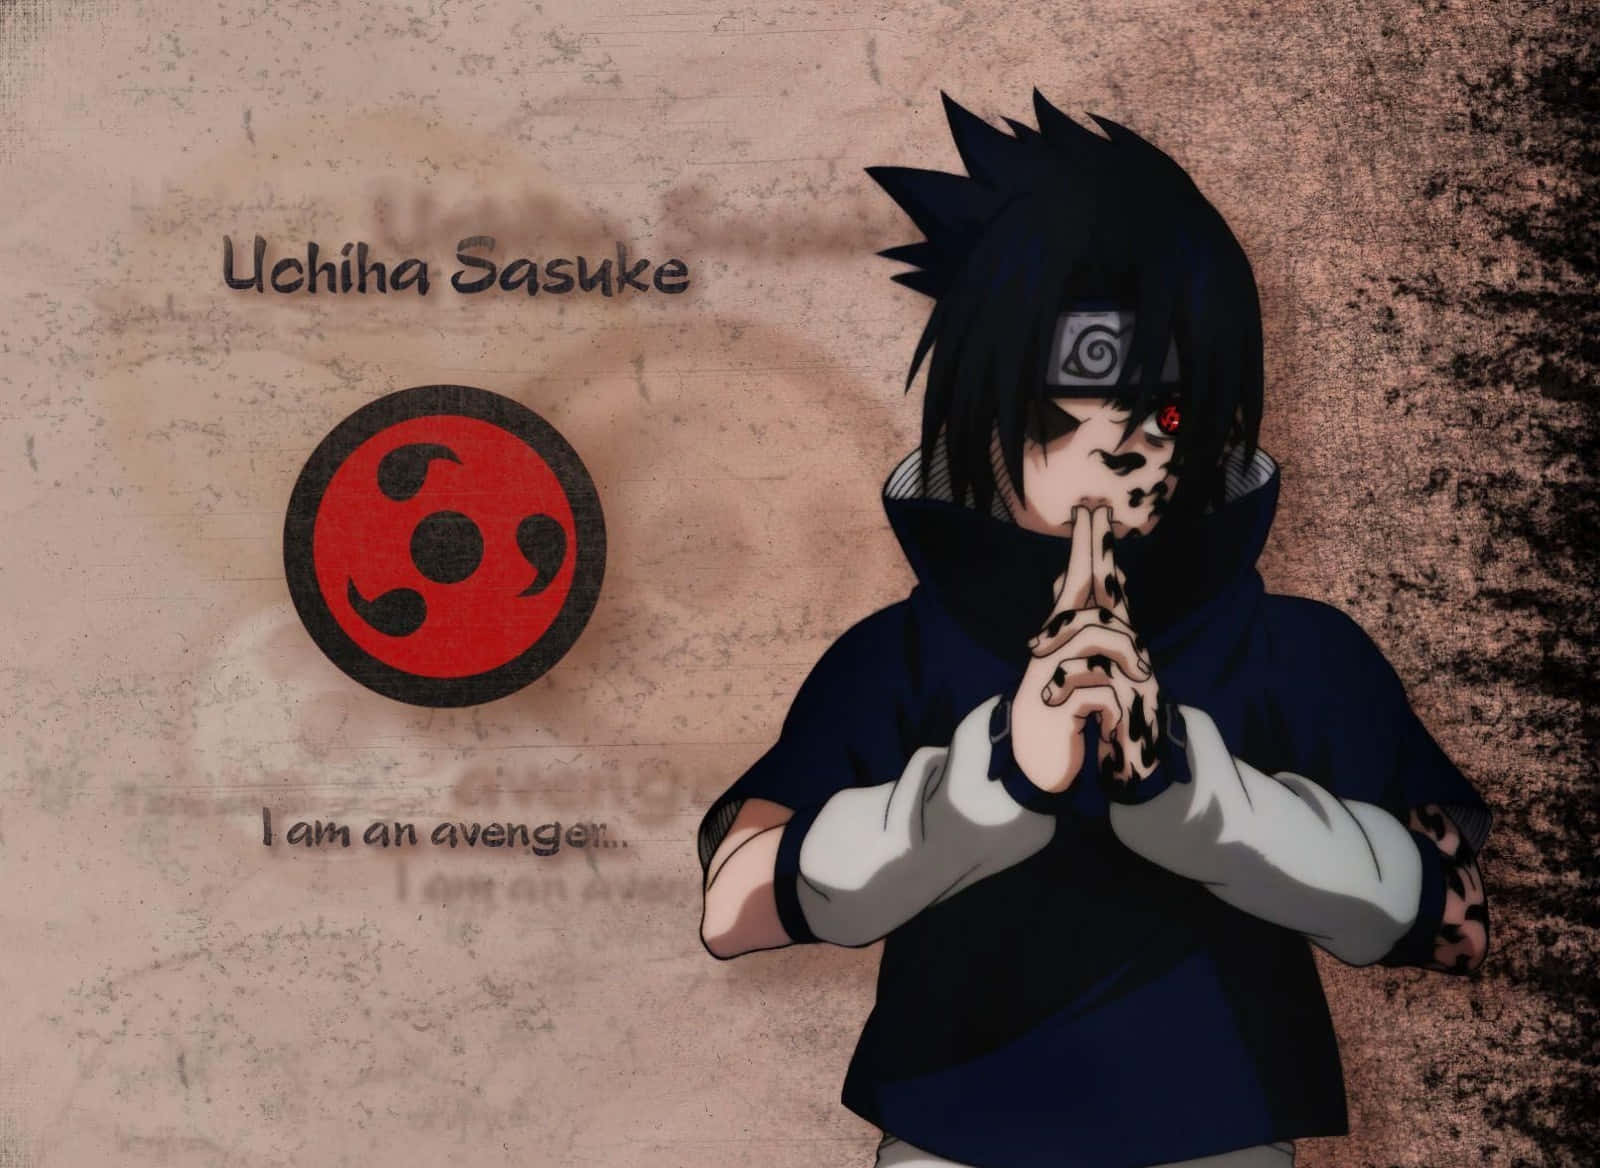 Join Sasuke on a daring journey as he overthrows his Curse Wallpaper